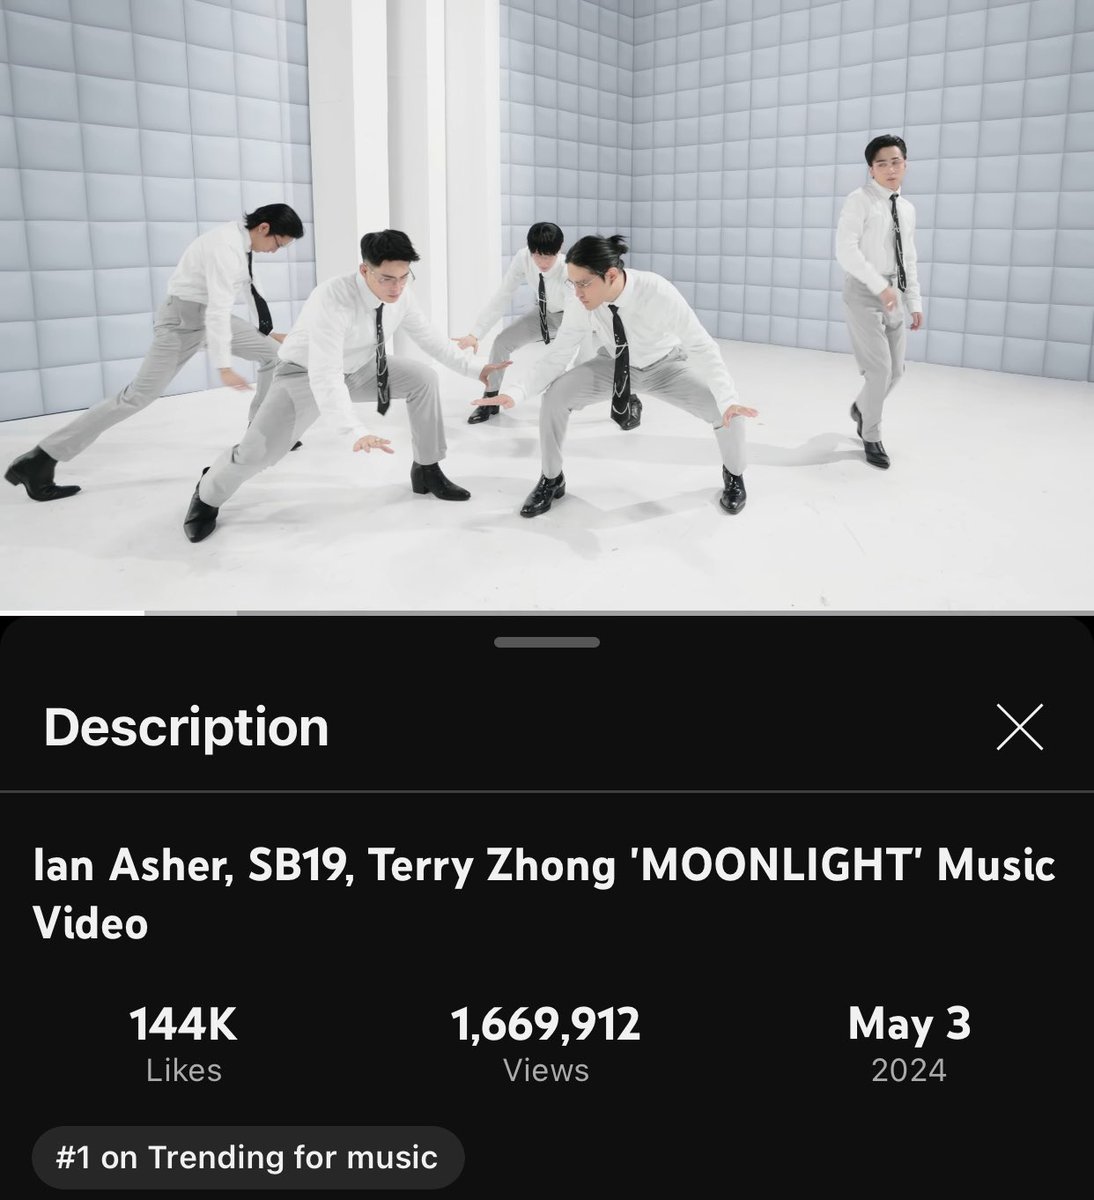 OMG! ‘MOONLIGHT’ MV by Ian Asher, SB19 and Terry Zhong is now at no.1 under music category on YouTube! We did it! 😭

#SB19 #MOONLIGHT
#MOONLIGHT_Top1YTTrending